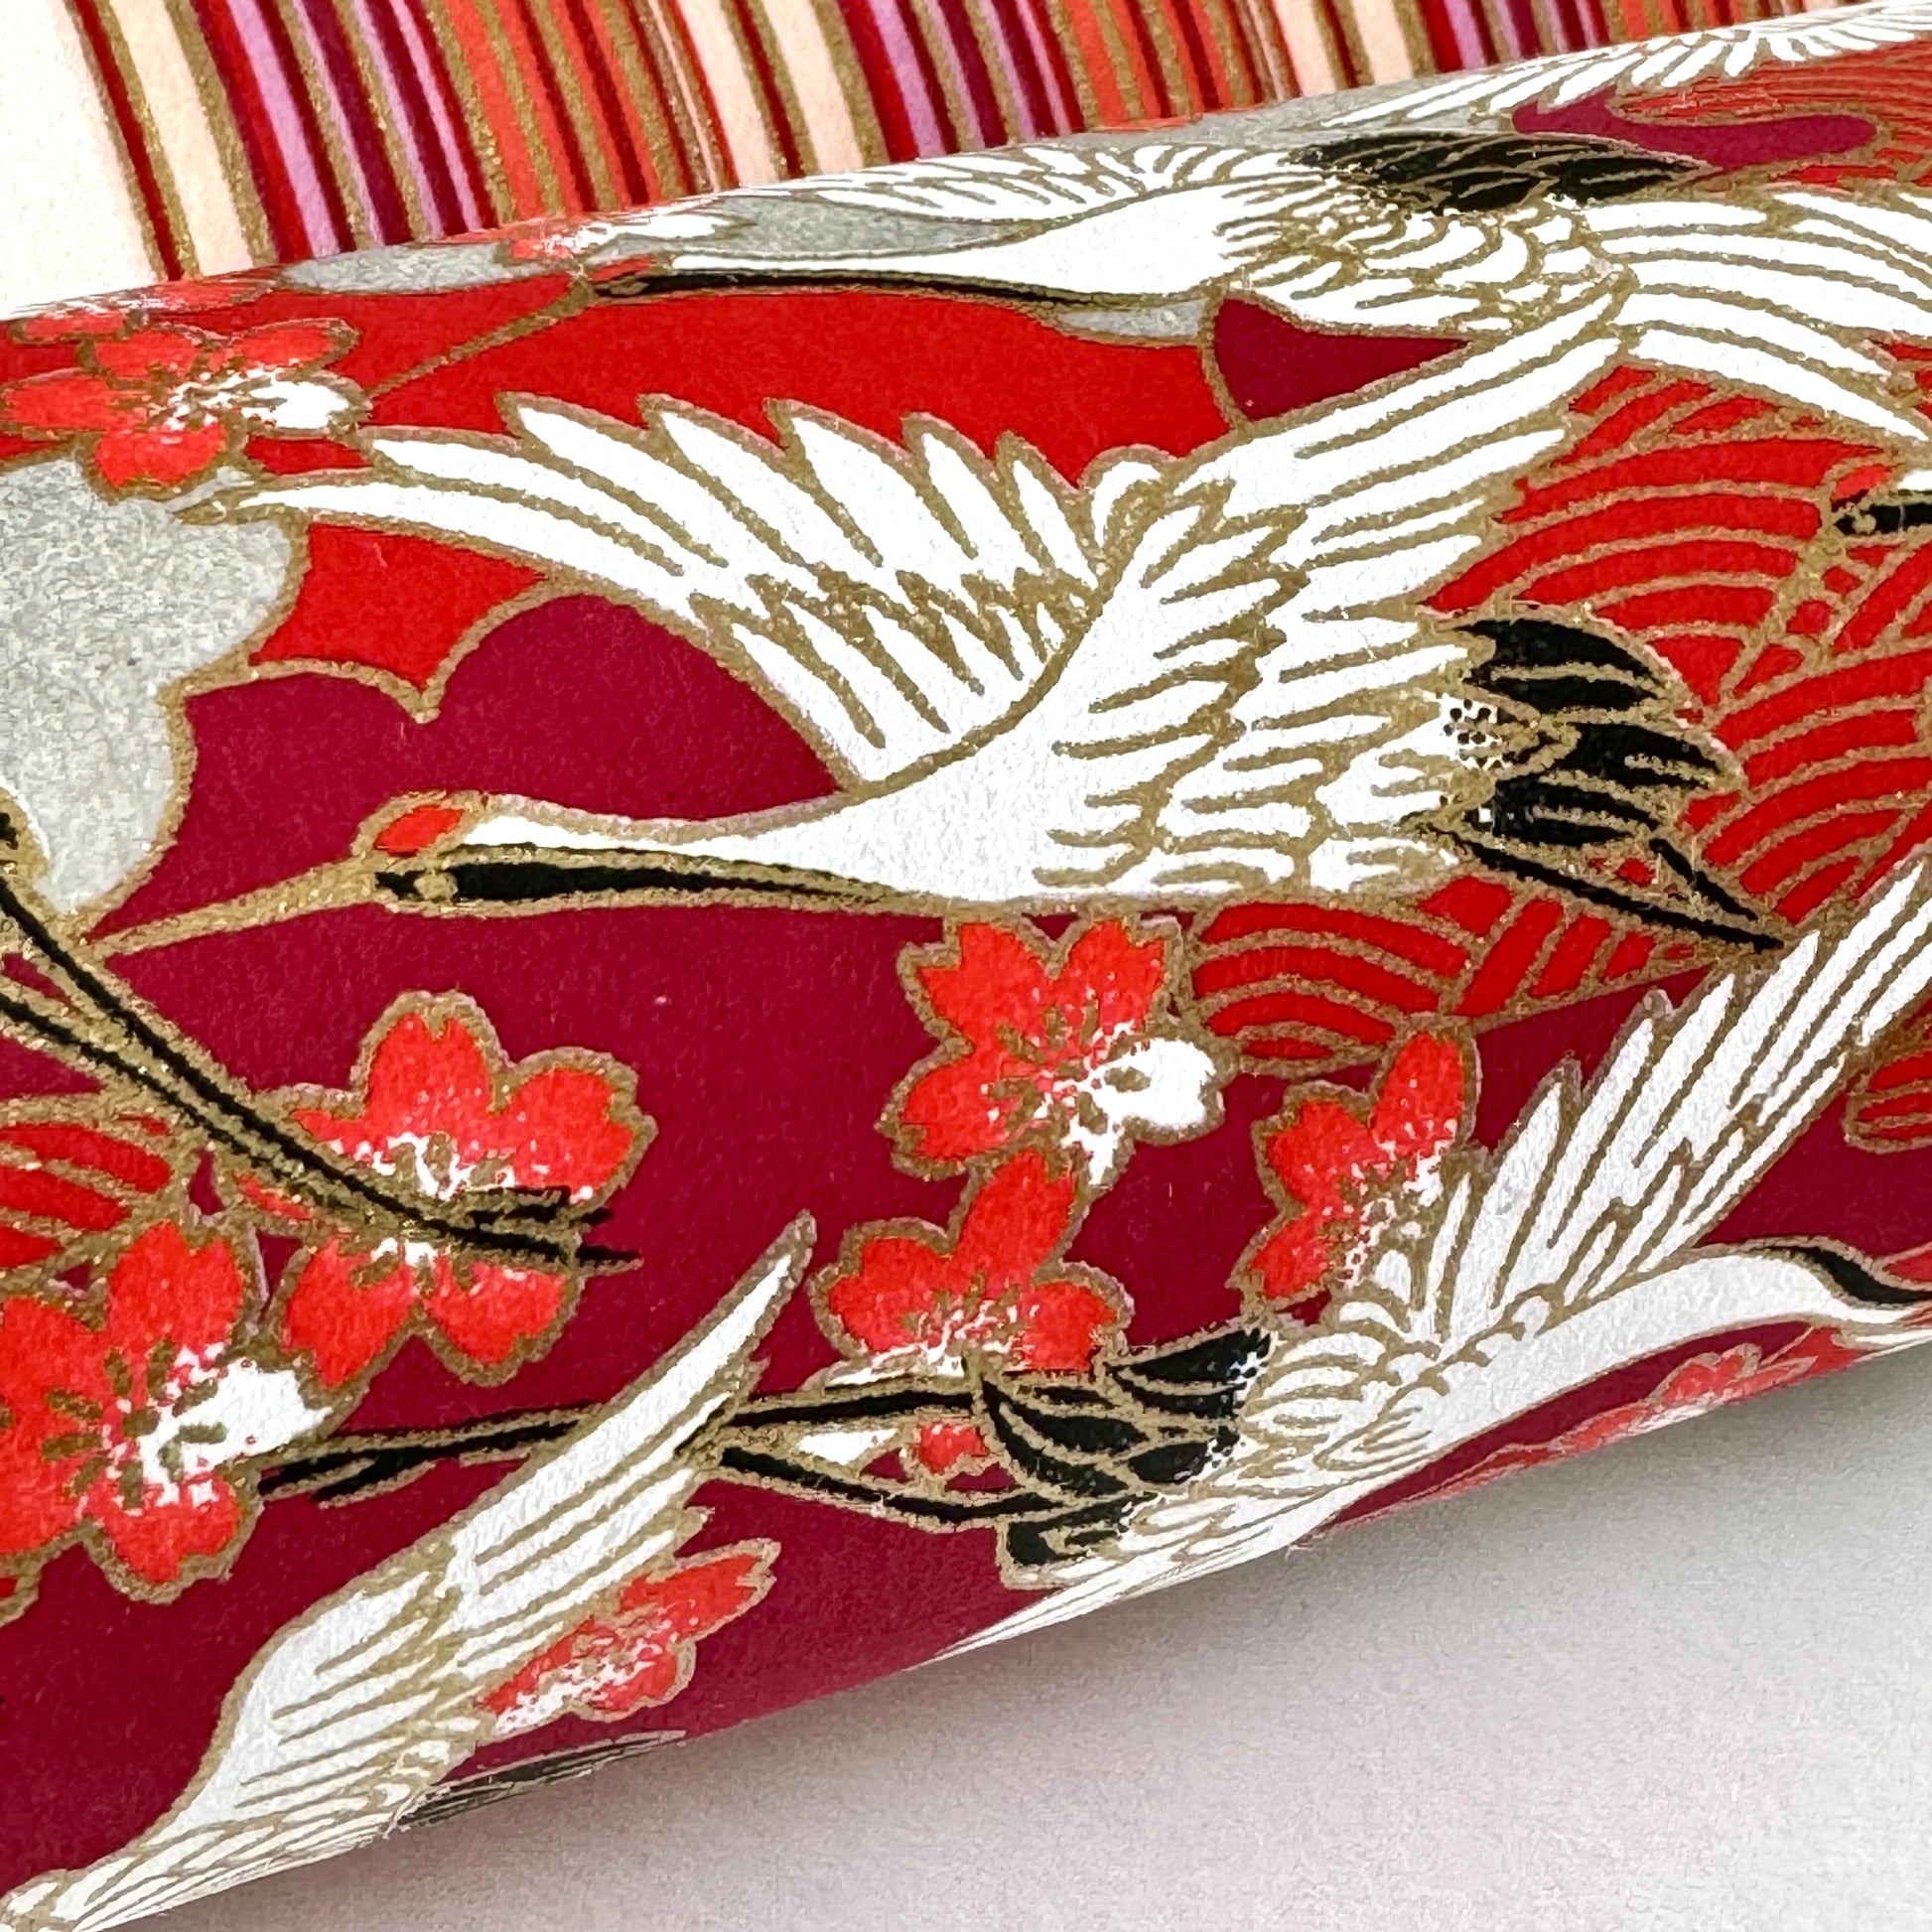 Japanese silkscreen chiyogami paper with a repeat pattern of white cranes in flight on a red and silver background, close up